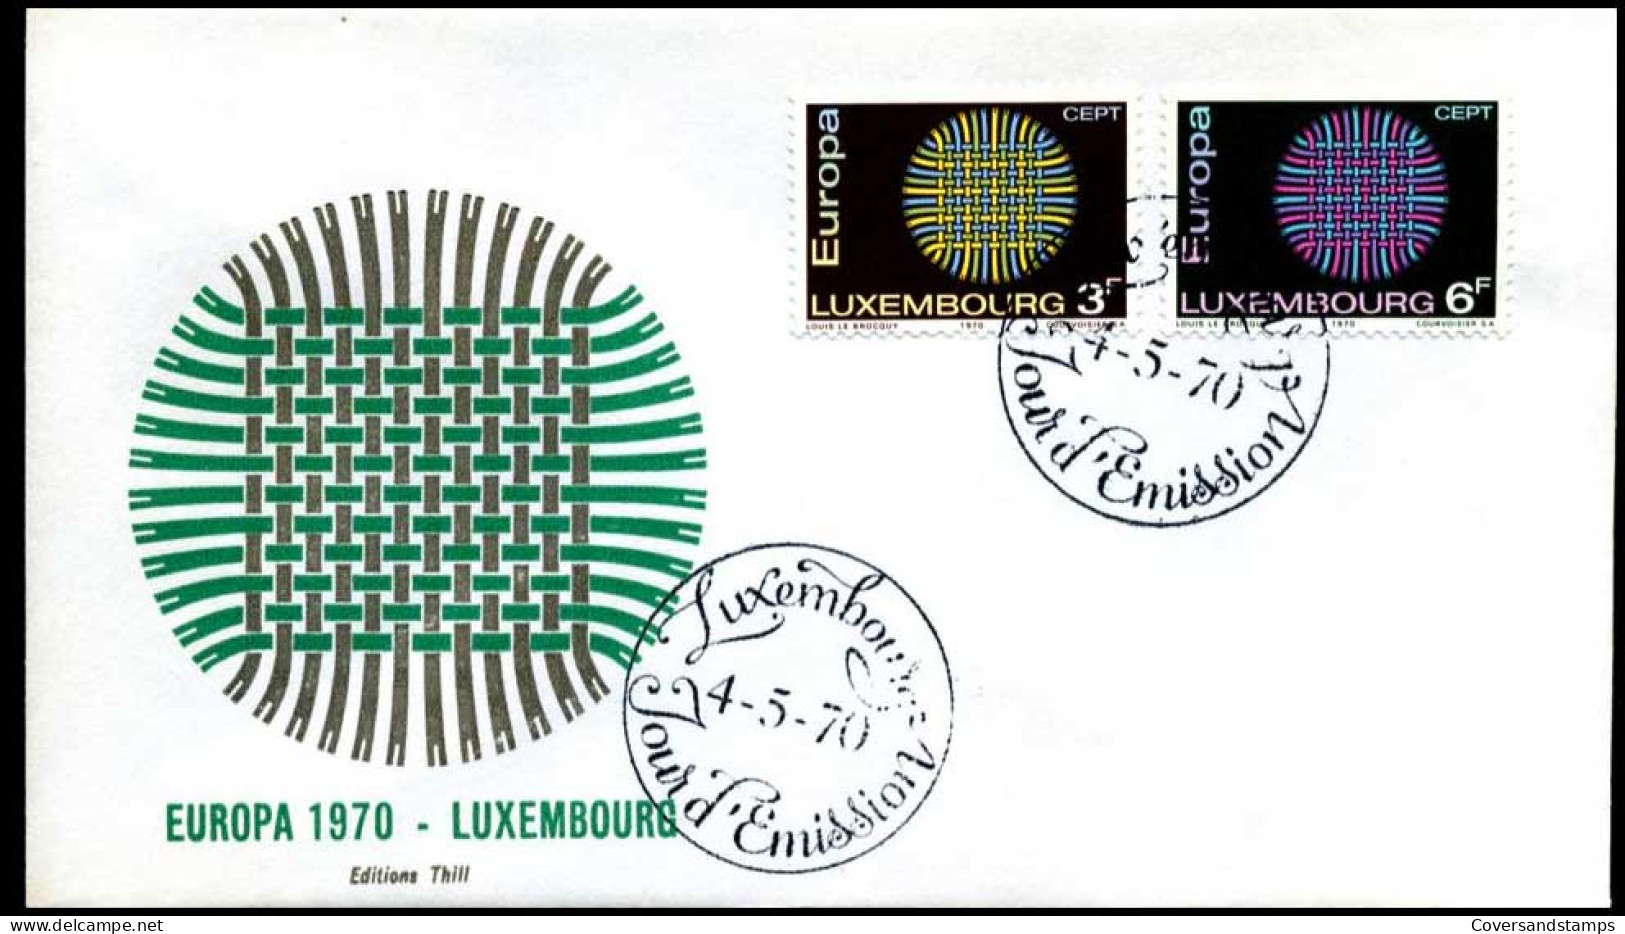  Luxembourg - FDC - Europa CEPT 1970 - 1970